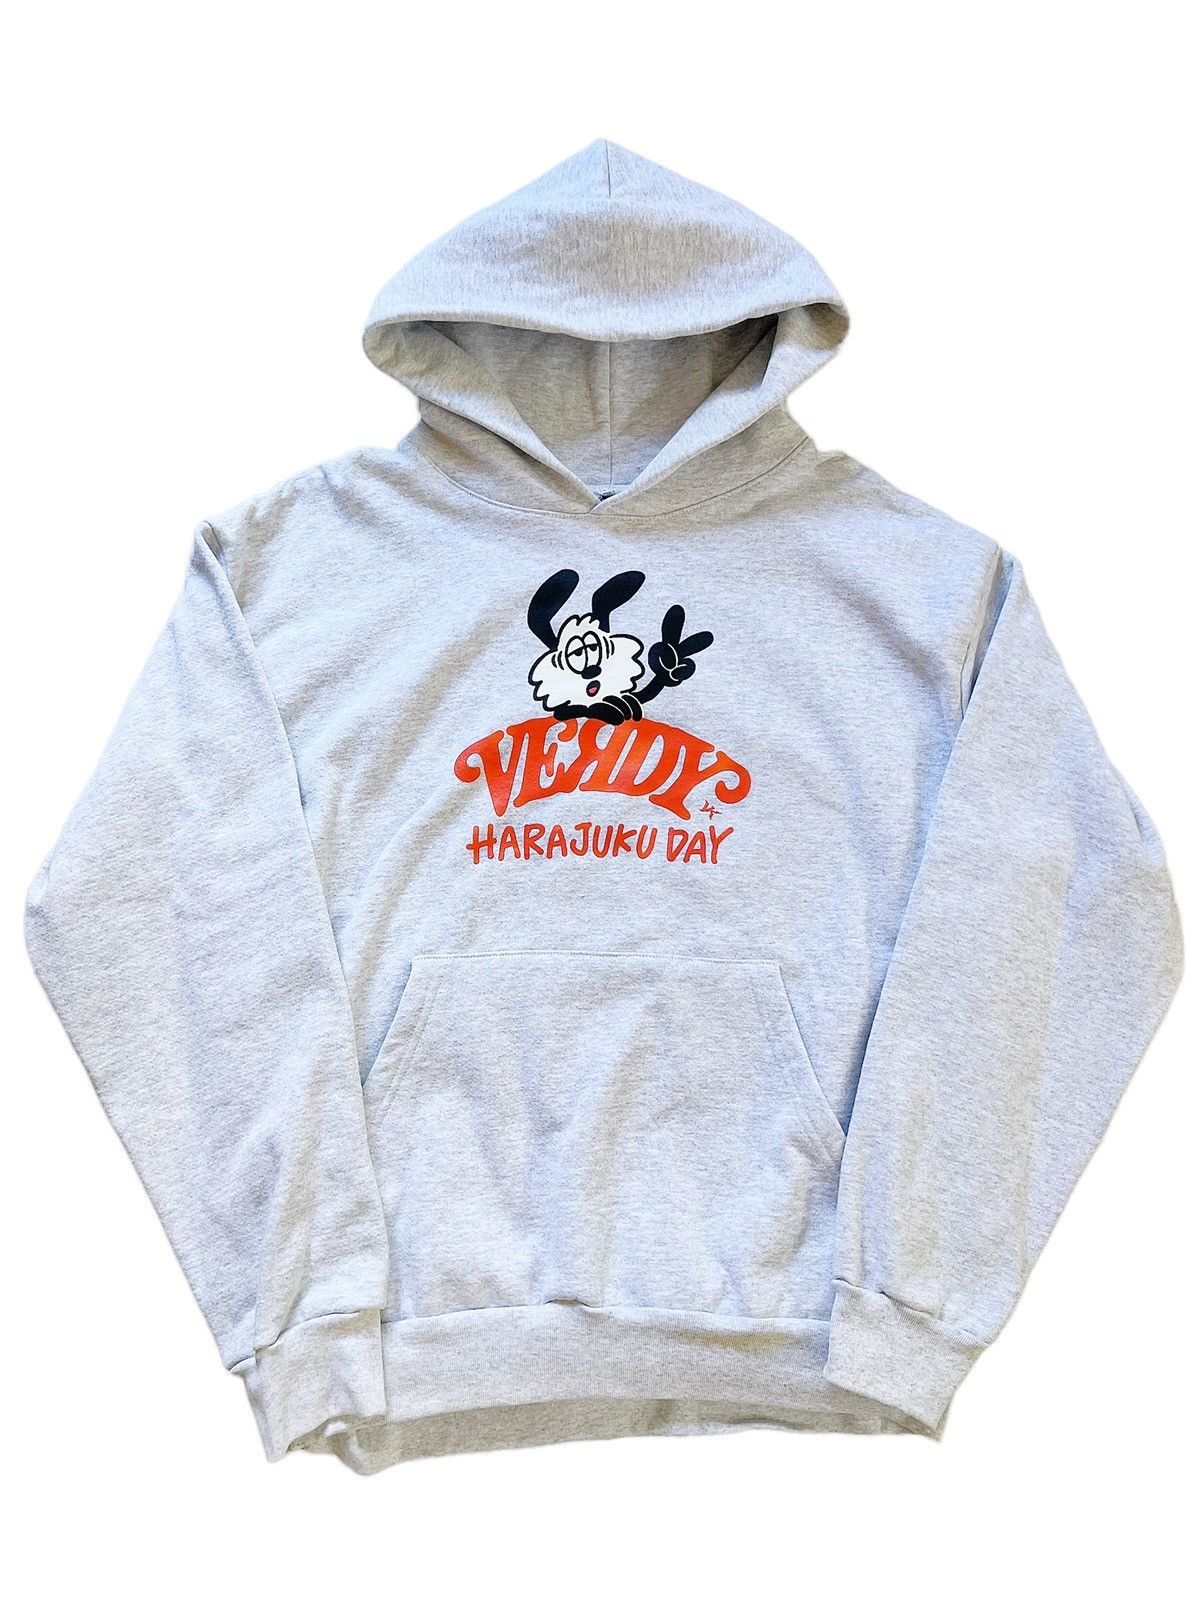 Girls Dont Cry RARE 2018 Harajuku Day Verdy Japan Exclusive Hood | Grailed